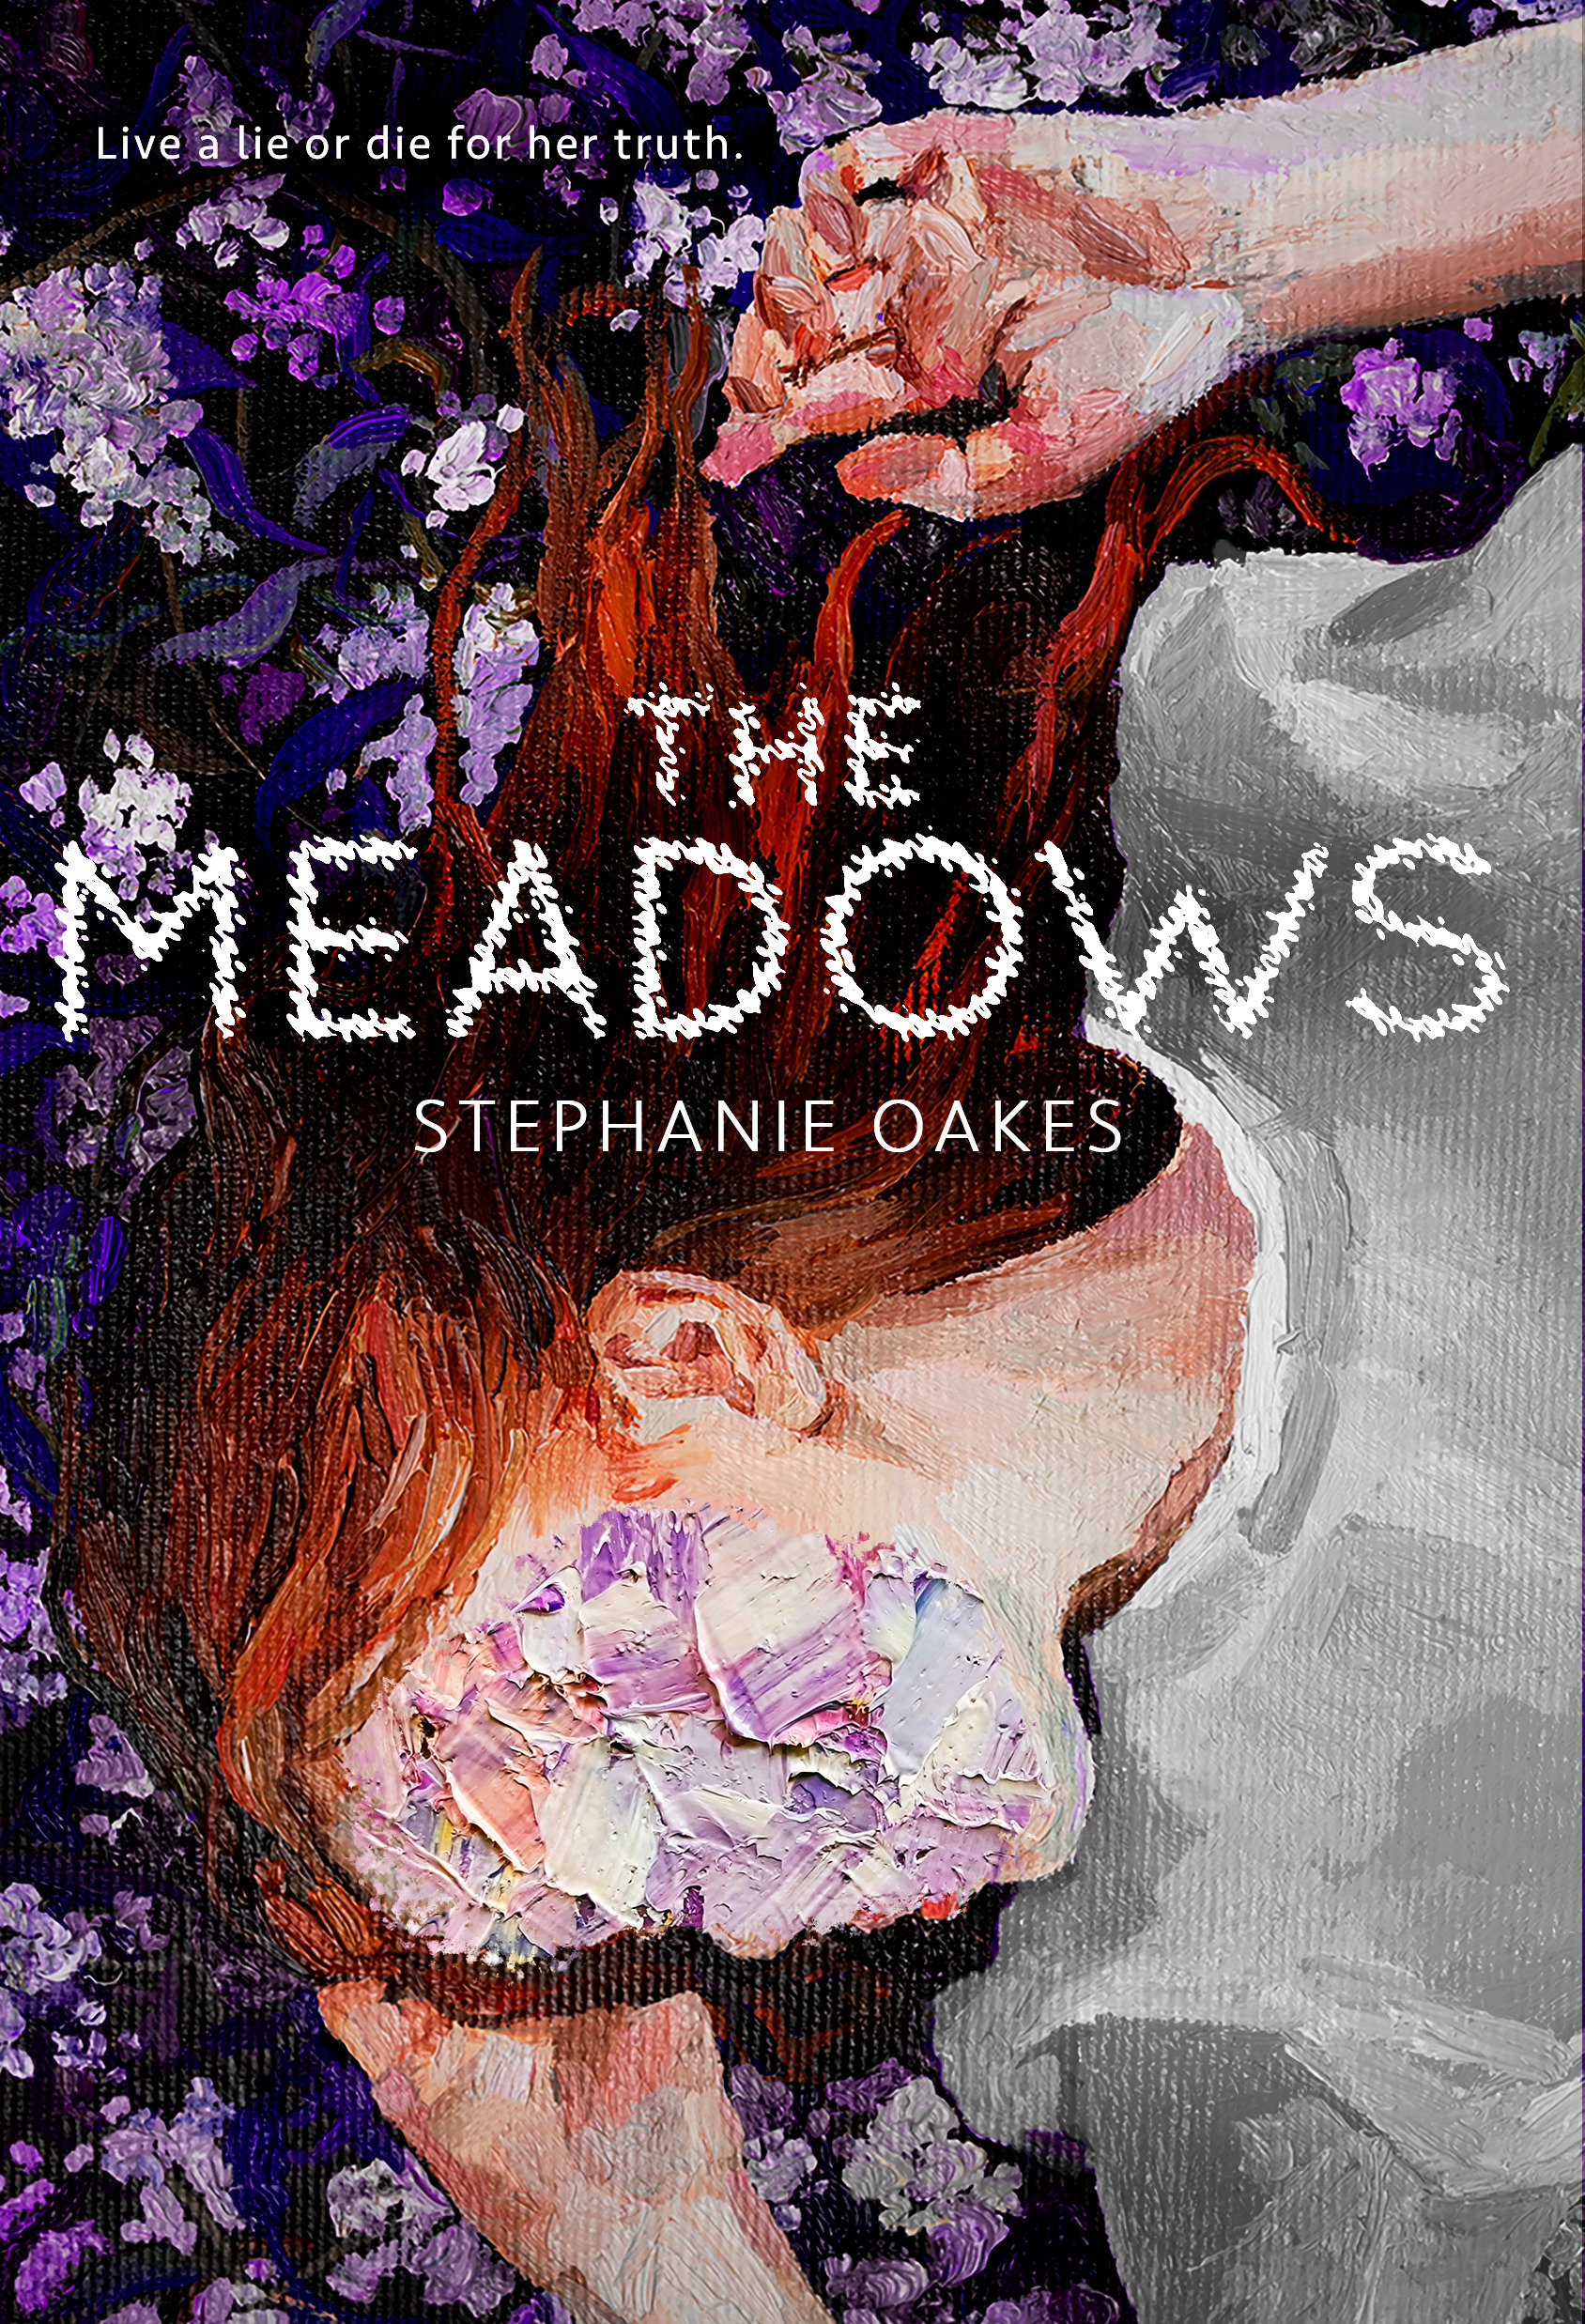 Book Review: The Meadows by Stephanie Oakes